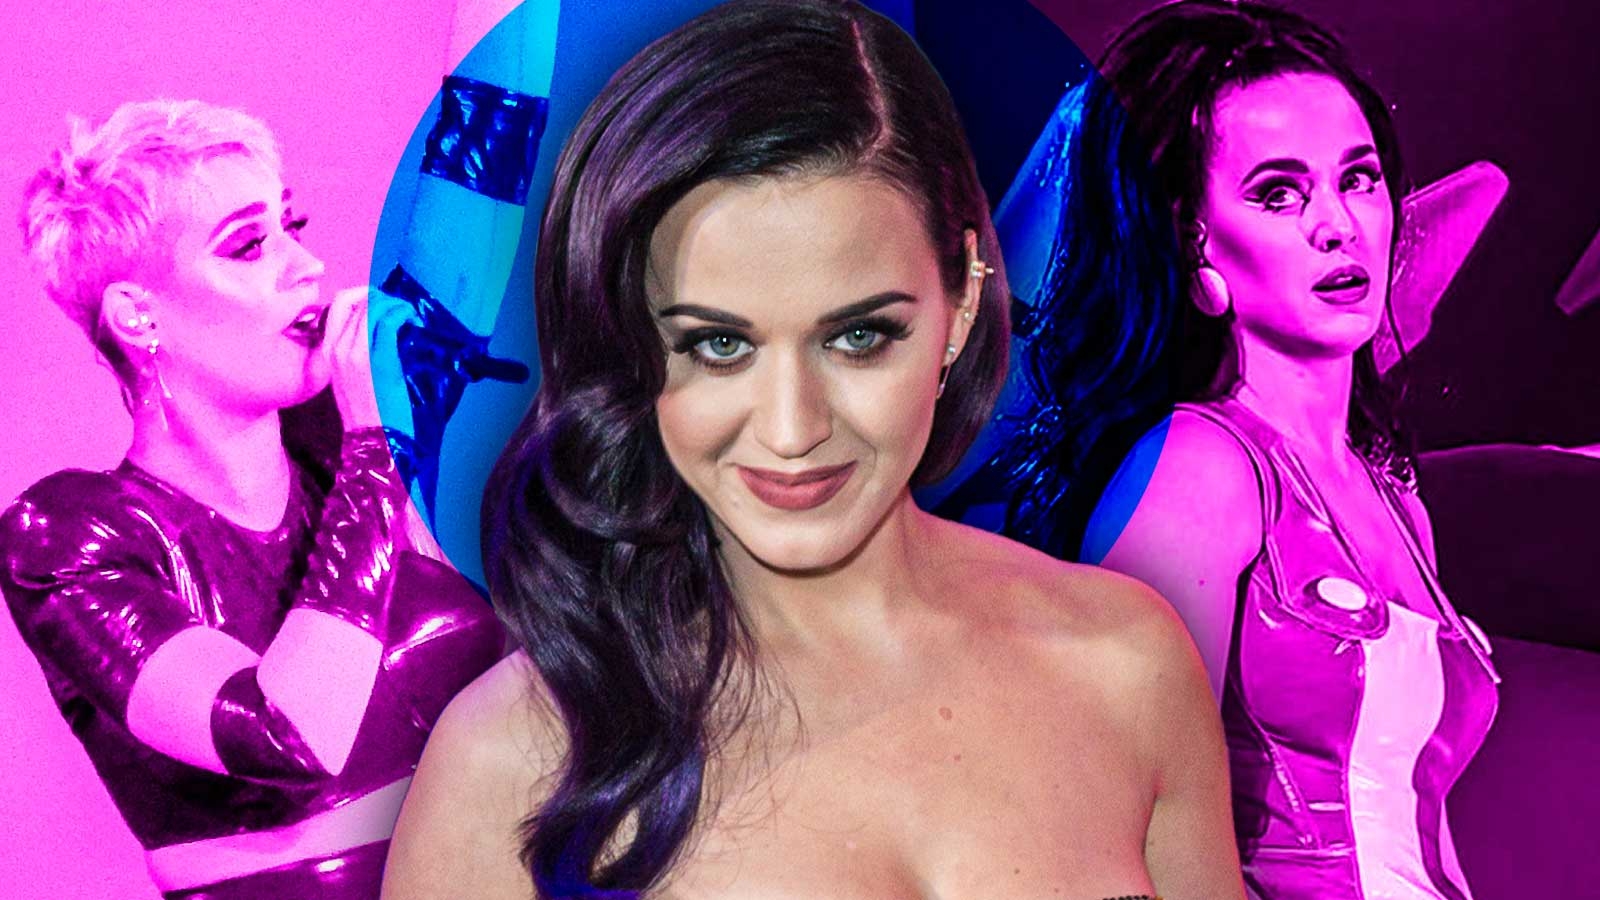 “He acts as her personal trainer”: Secrets Behind Katy Perry’s Enviable Figure Revealed as Singer Keeps Ignoring Ozempic Accusers – Report